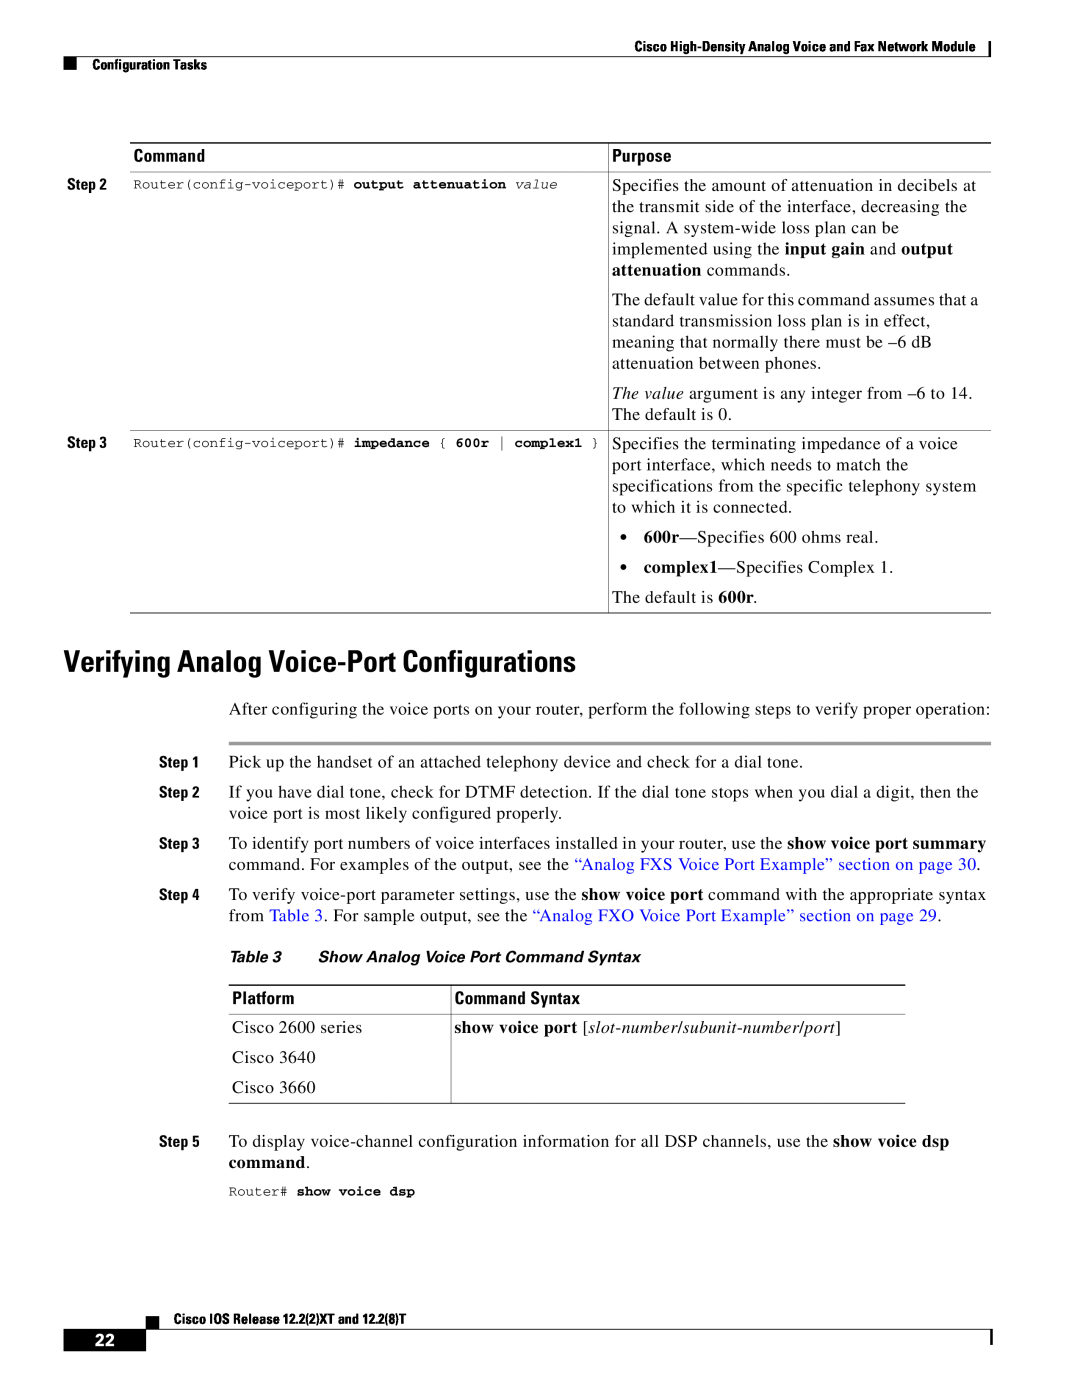 Weed Eater 2600 manual Verifying Analog Voice-PortConfigurations, Command Syntax, Purpose, Platform 